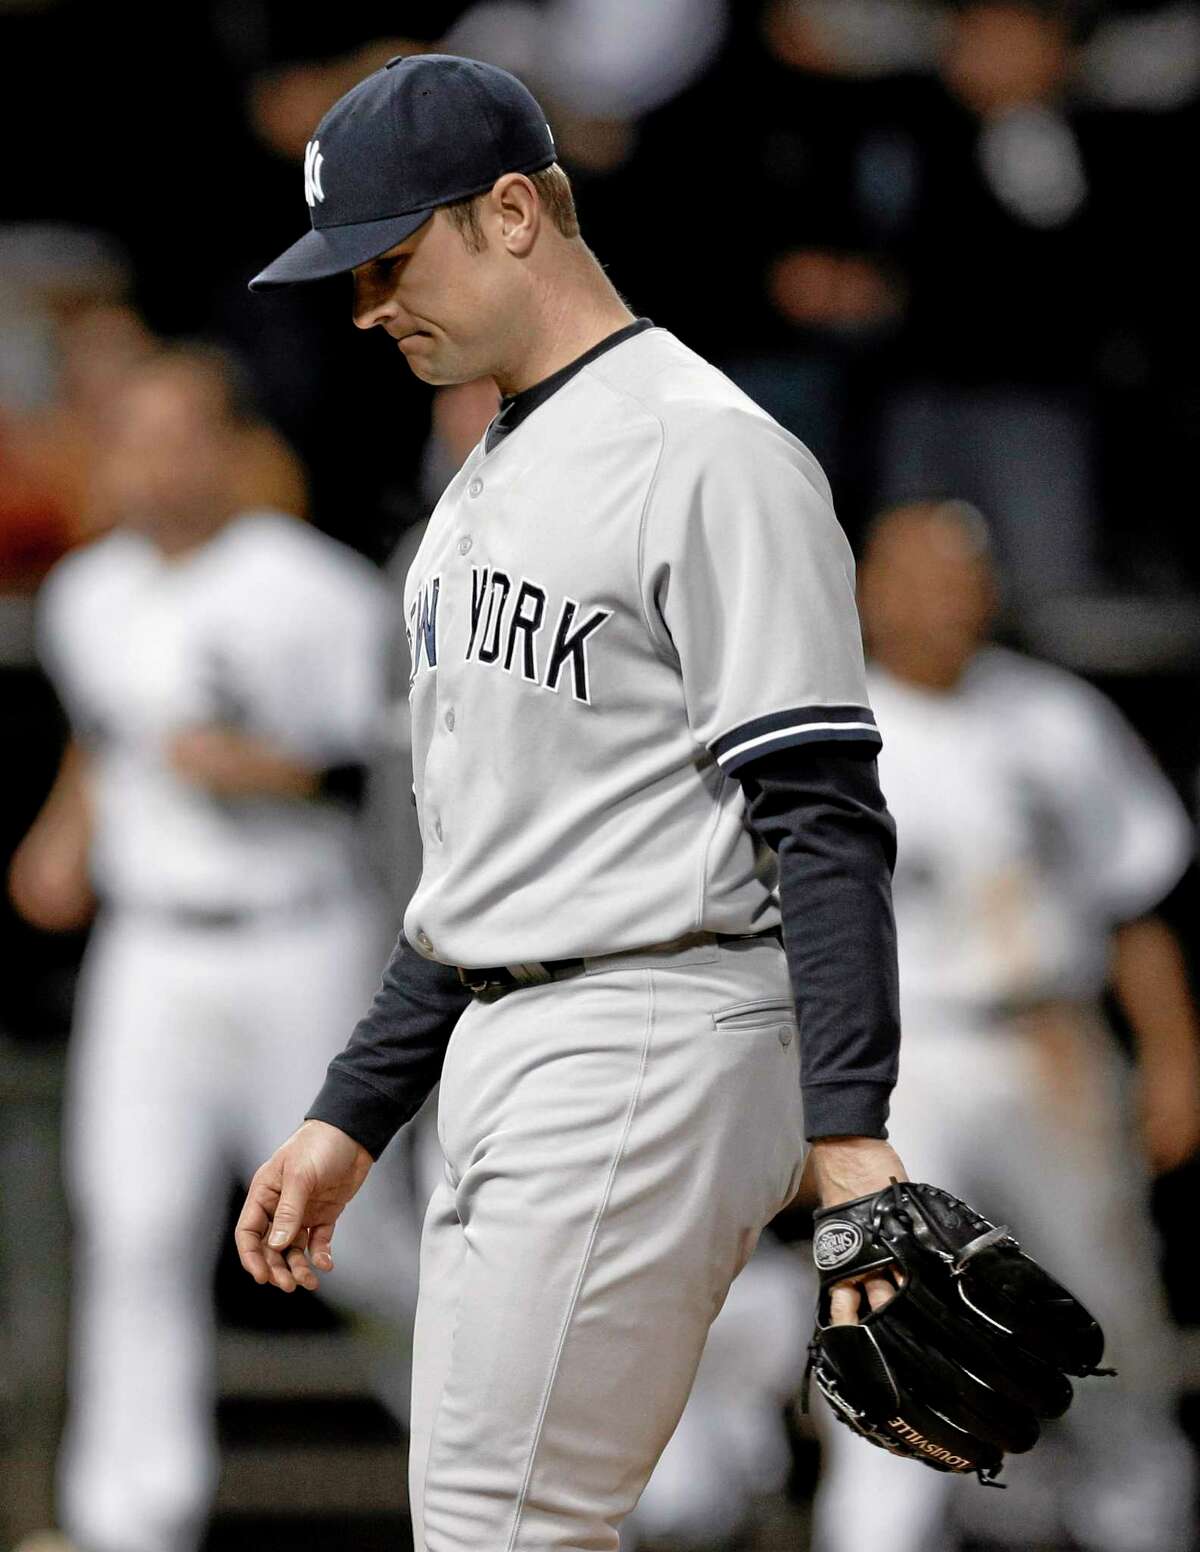 Yankees closer David Robertson looks down as he leaves the field after Chicago White Sox’s Adam Dunn hit the game-winning two-run home run during the ninth inning Friday.